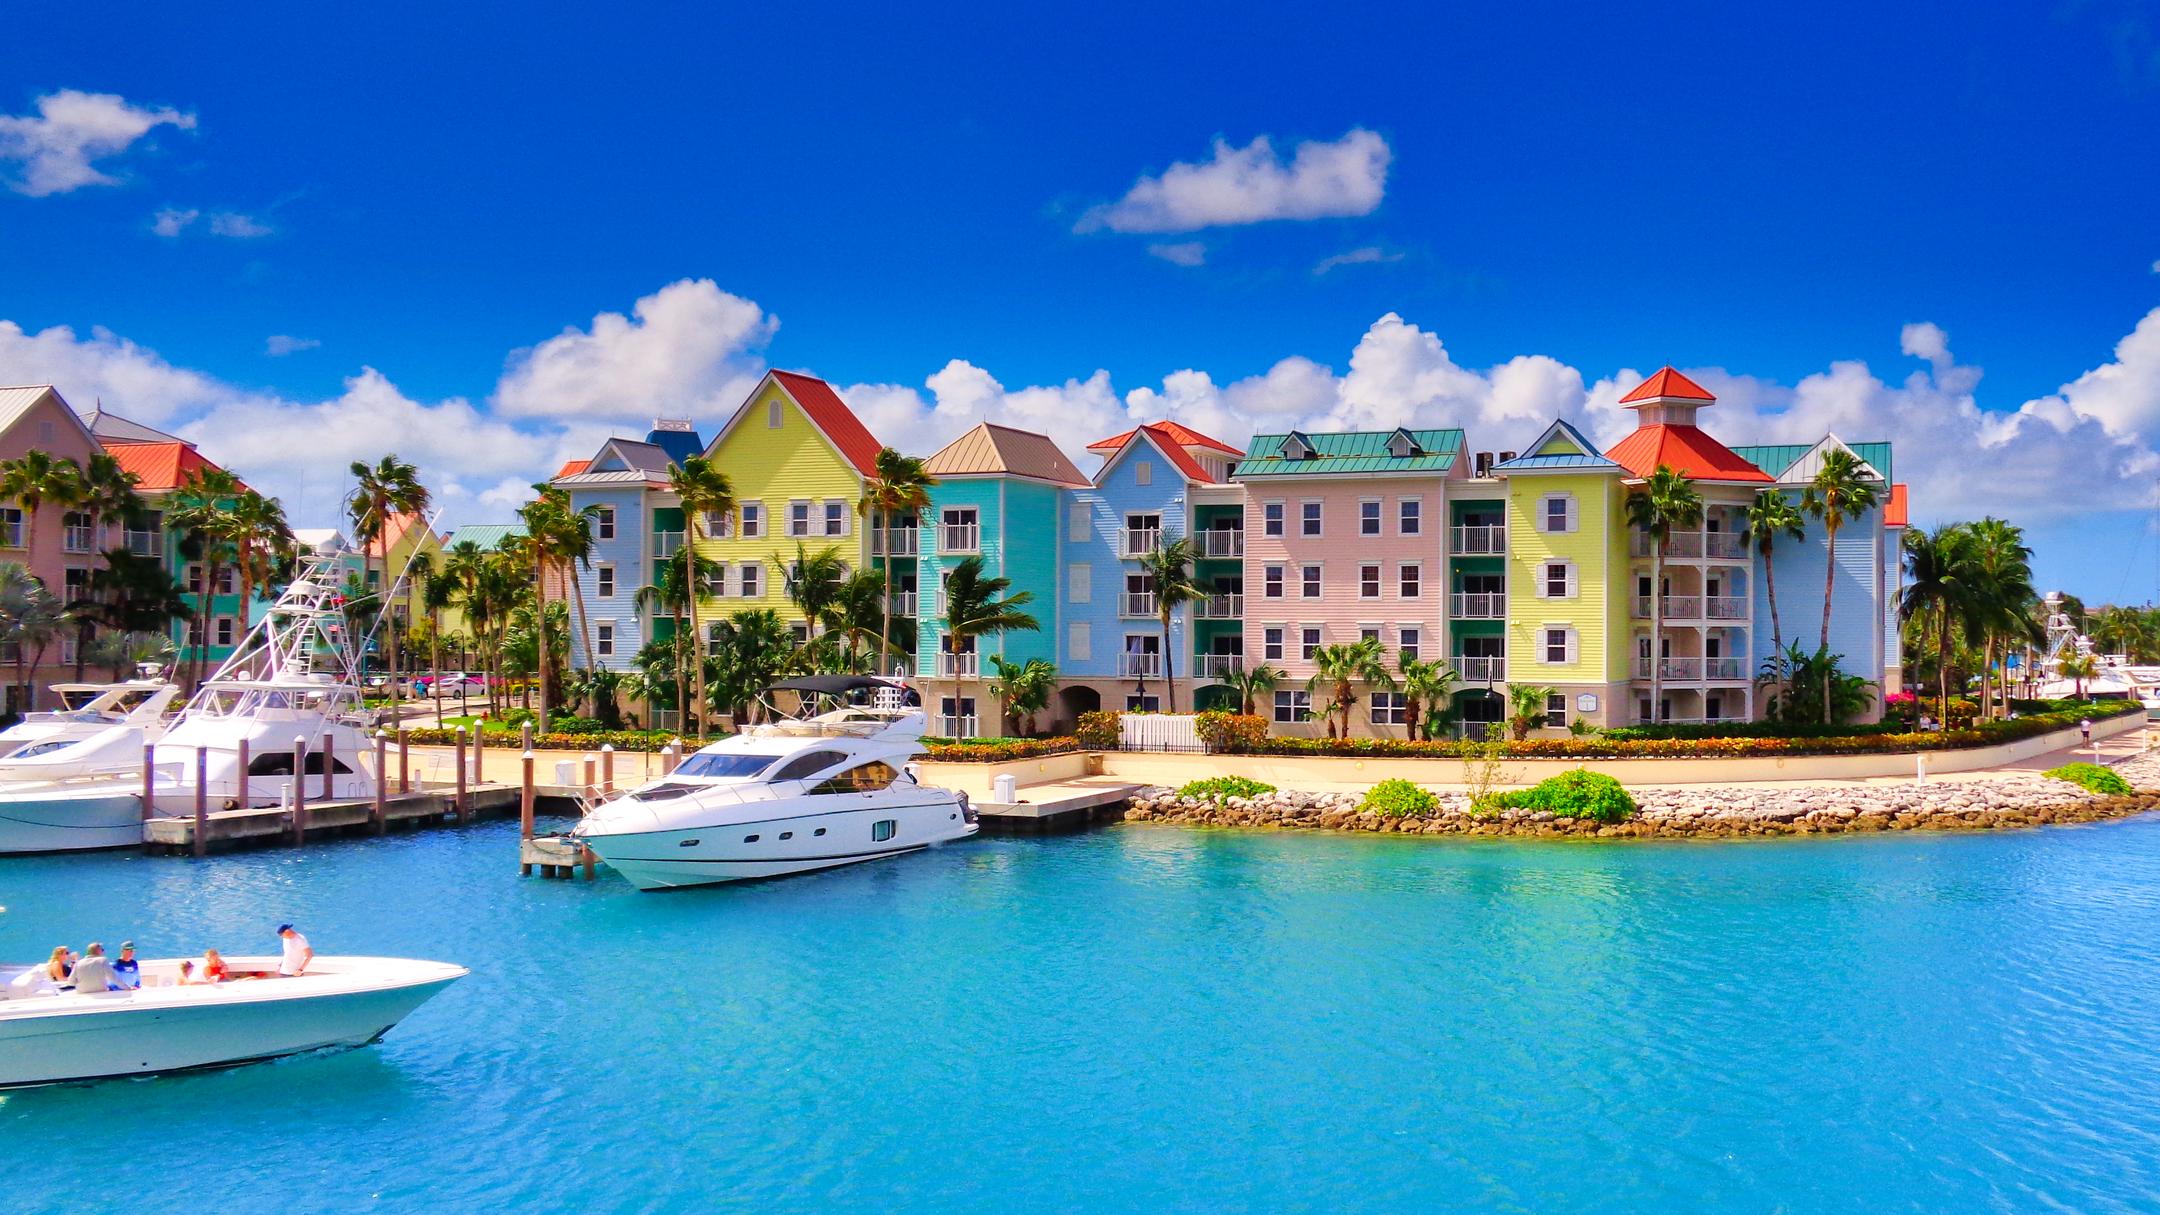 The Bahamas Hotels - Amazing Deals on 2,901 Hotels in The Bahamas